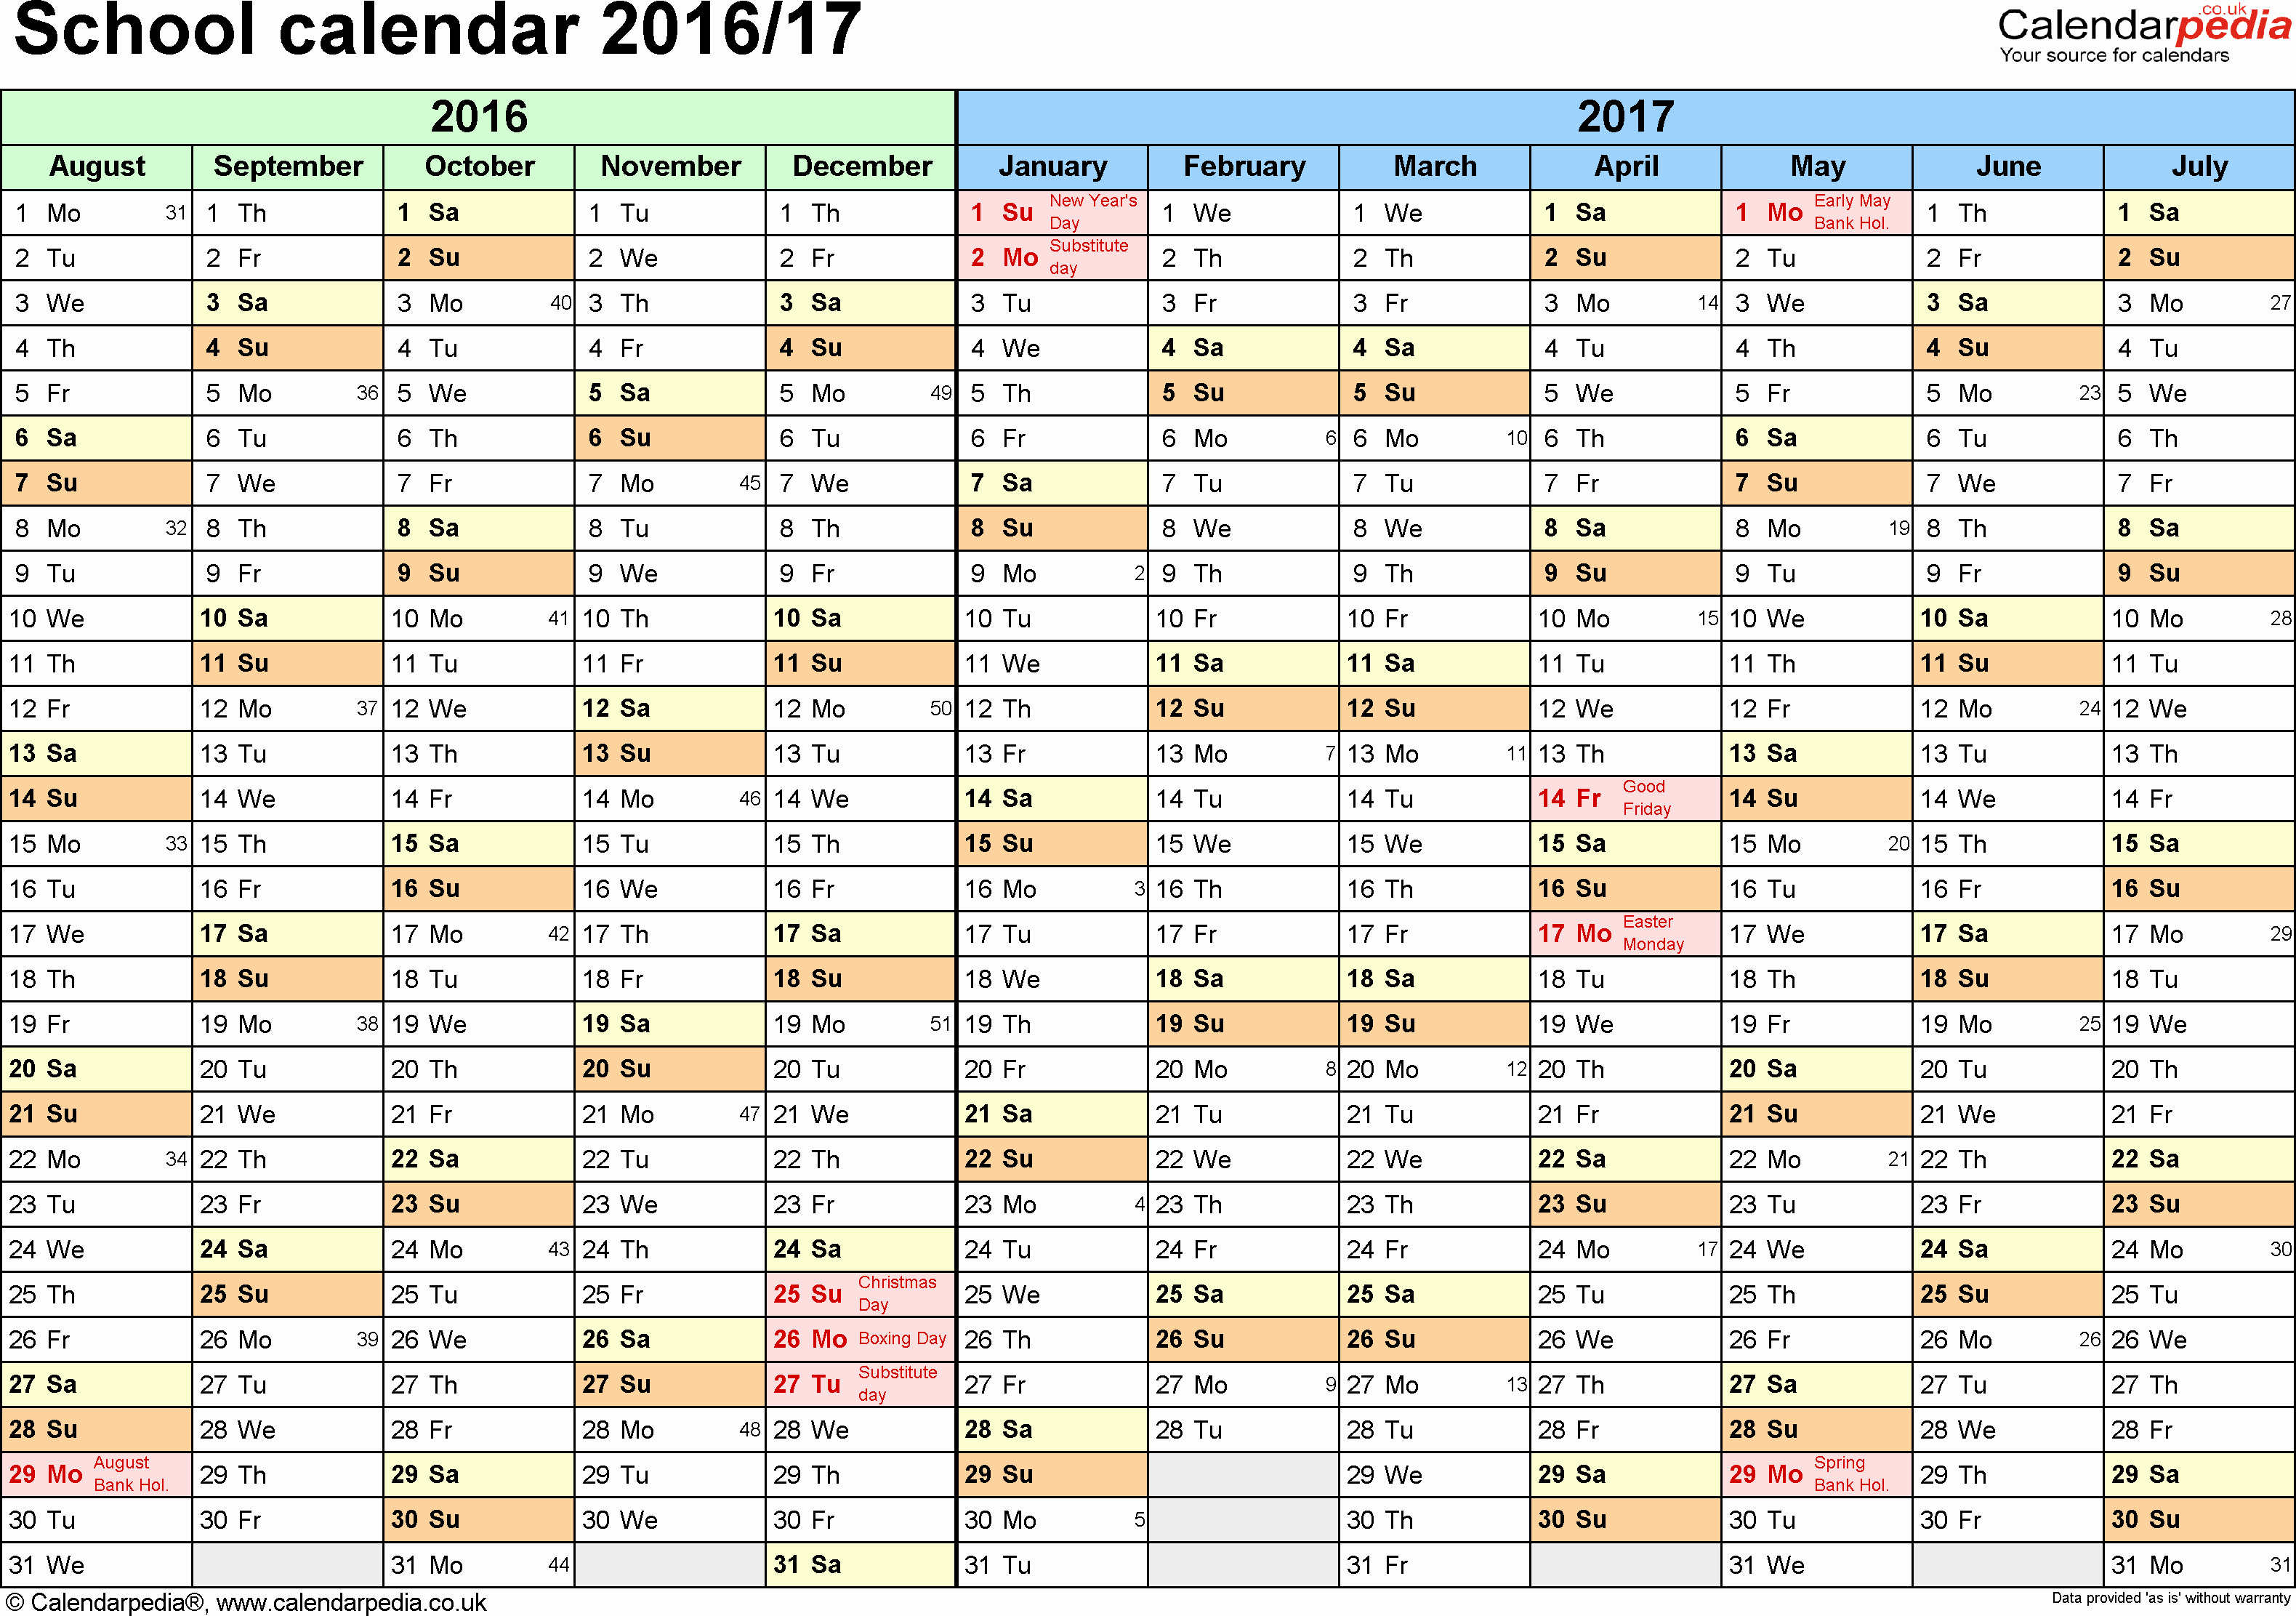 Excel 2016 Calendar with Holidays Lovely School Calendars 2016 2017 as Free Printable Excel Templates